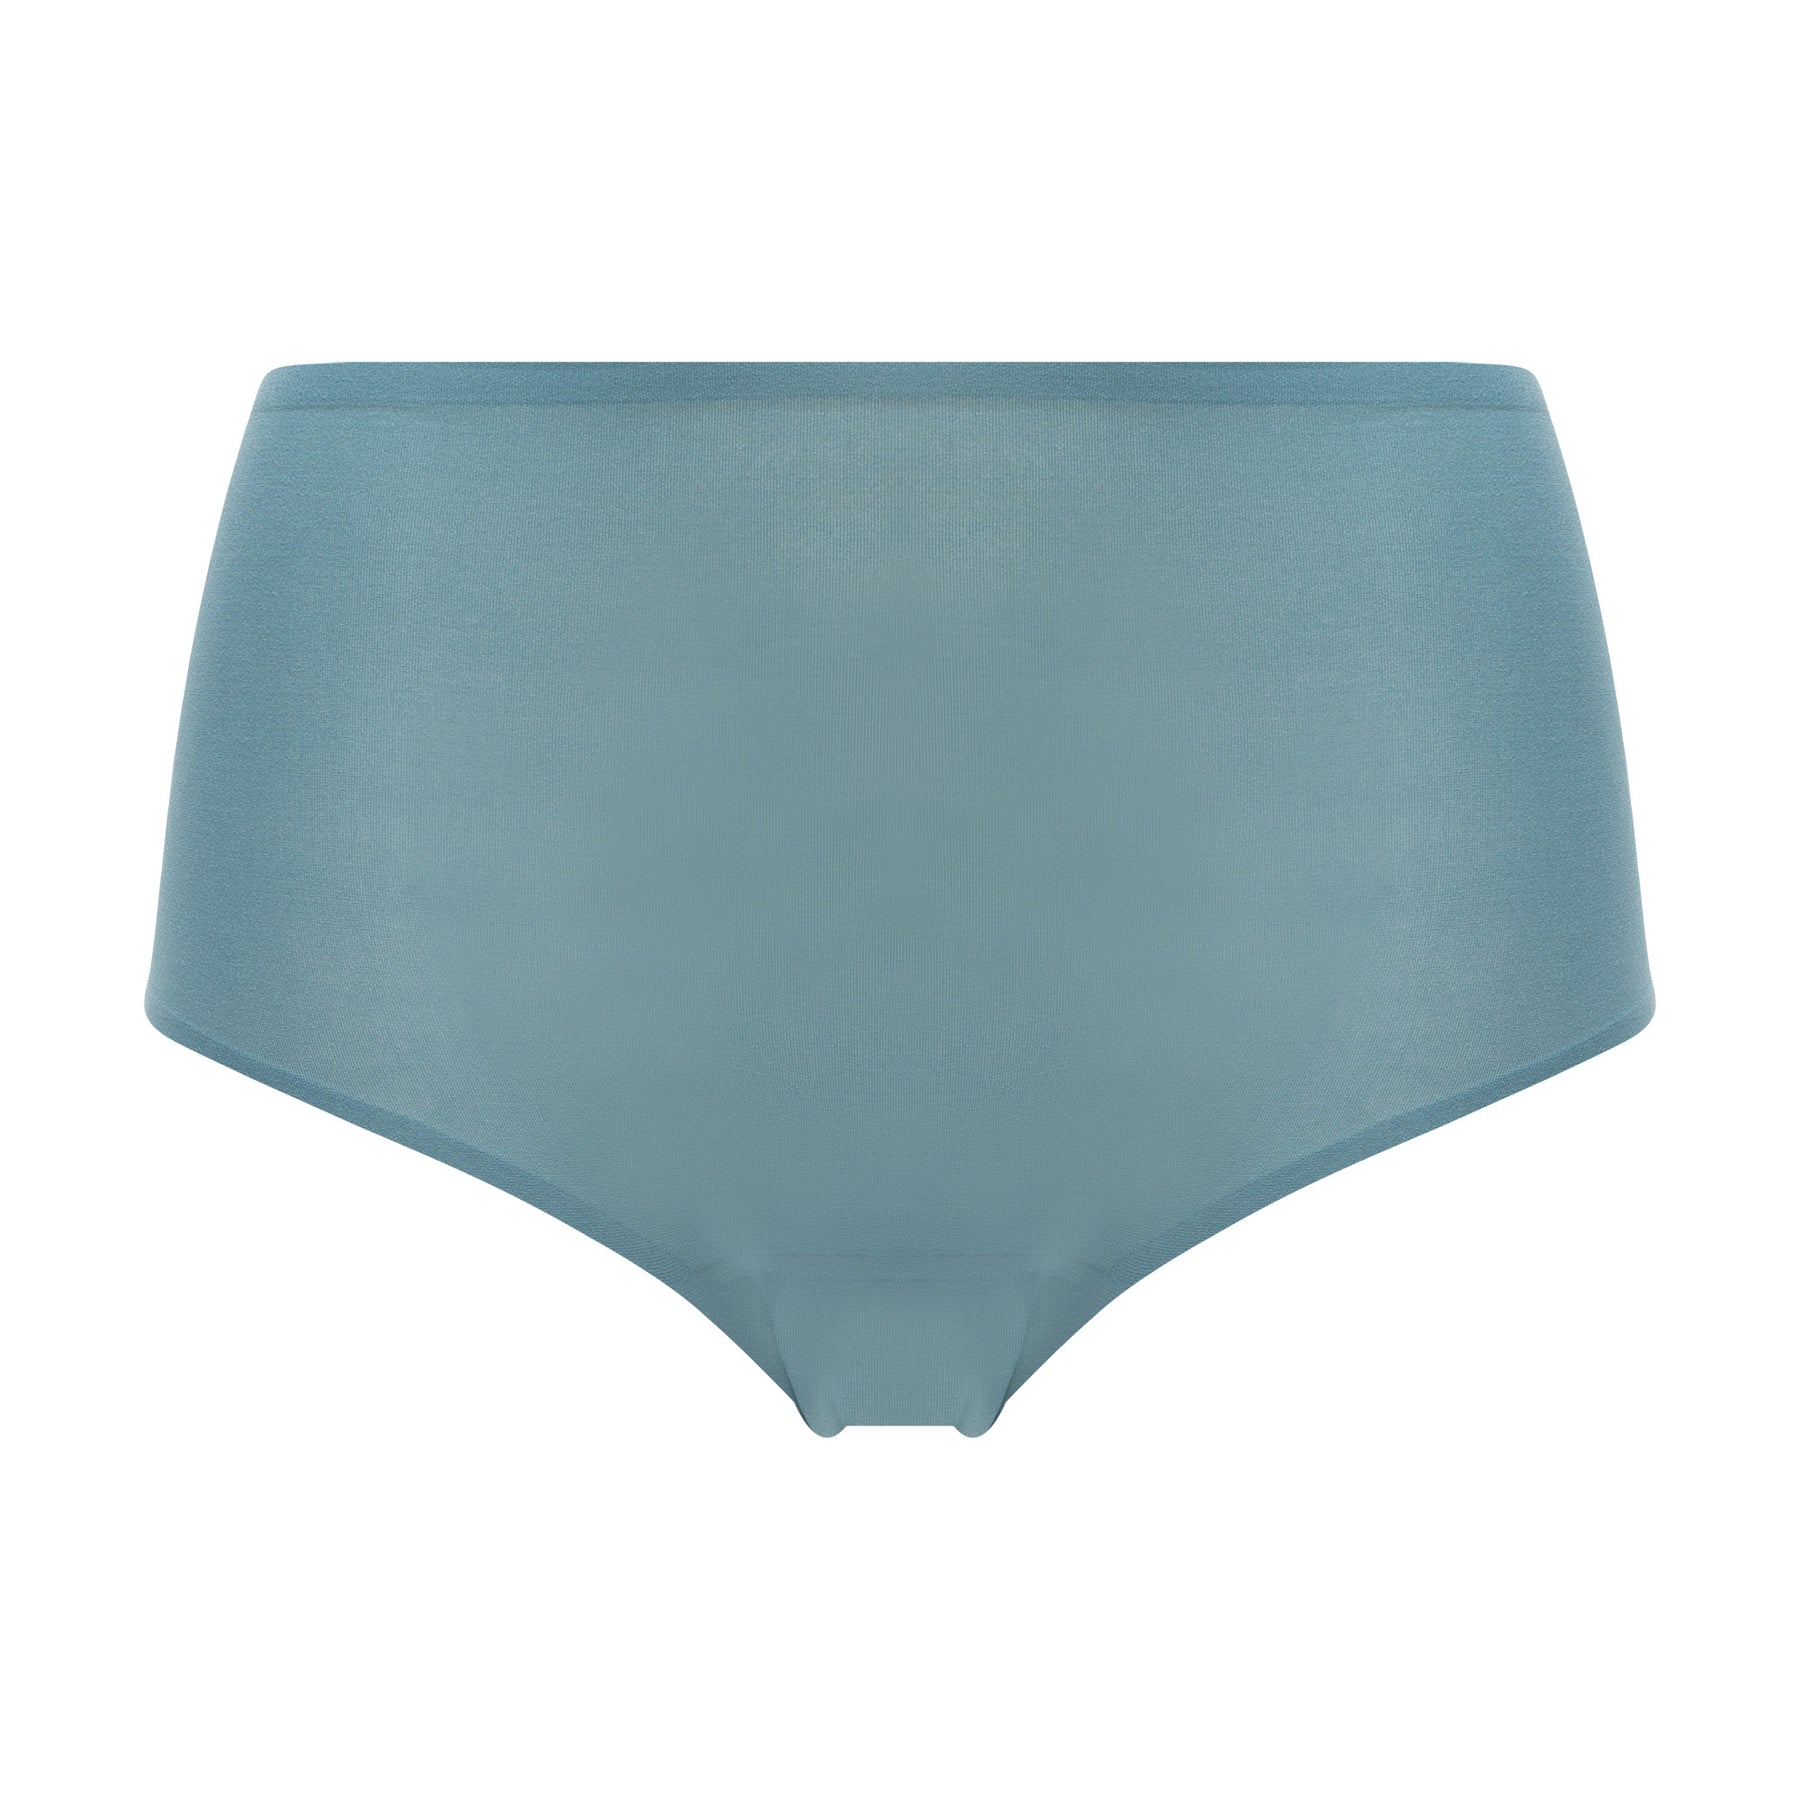 SoftStretch Full Brief In Ocean Green by Chantelle – My Bare Essentials